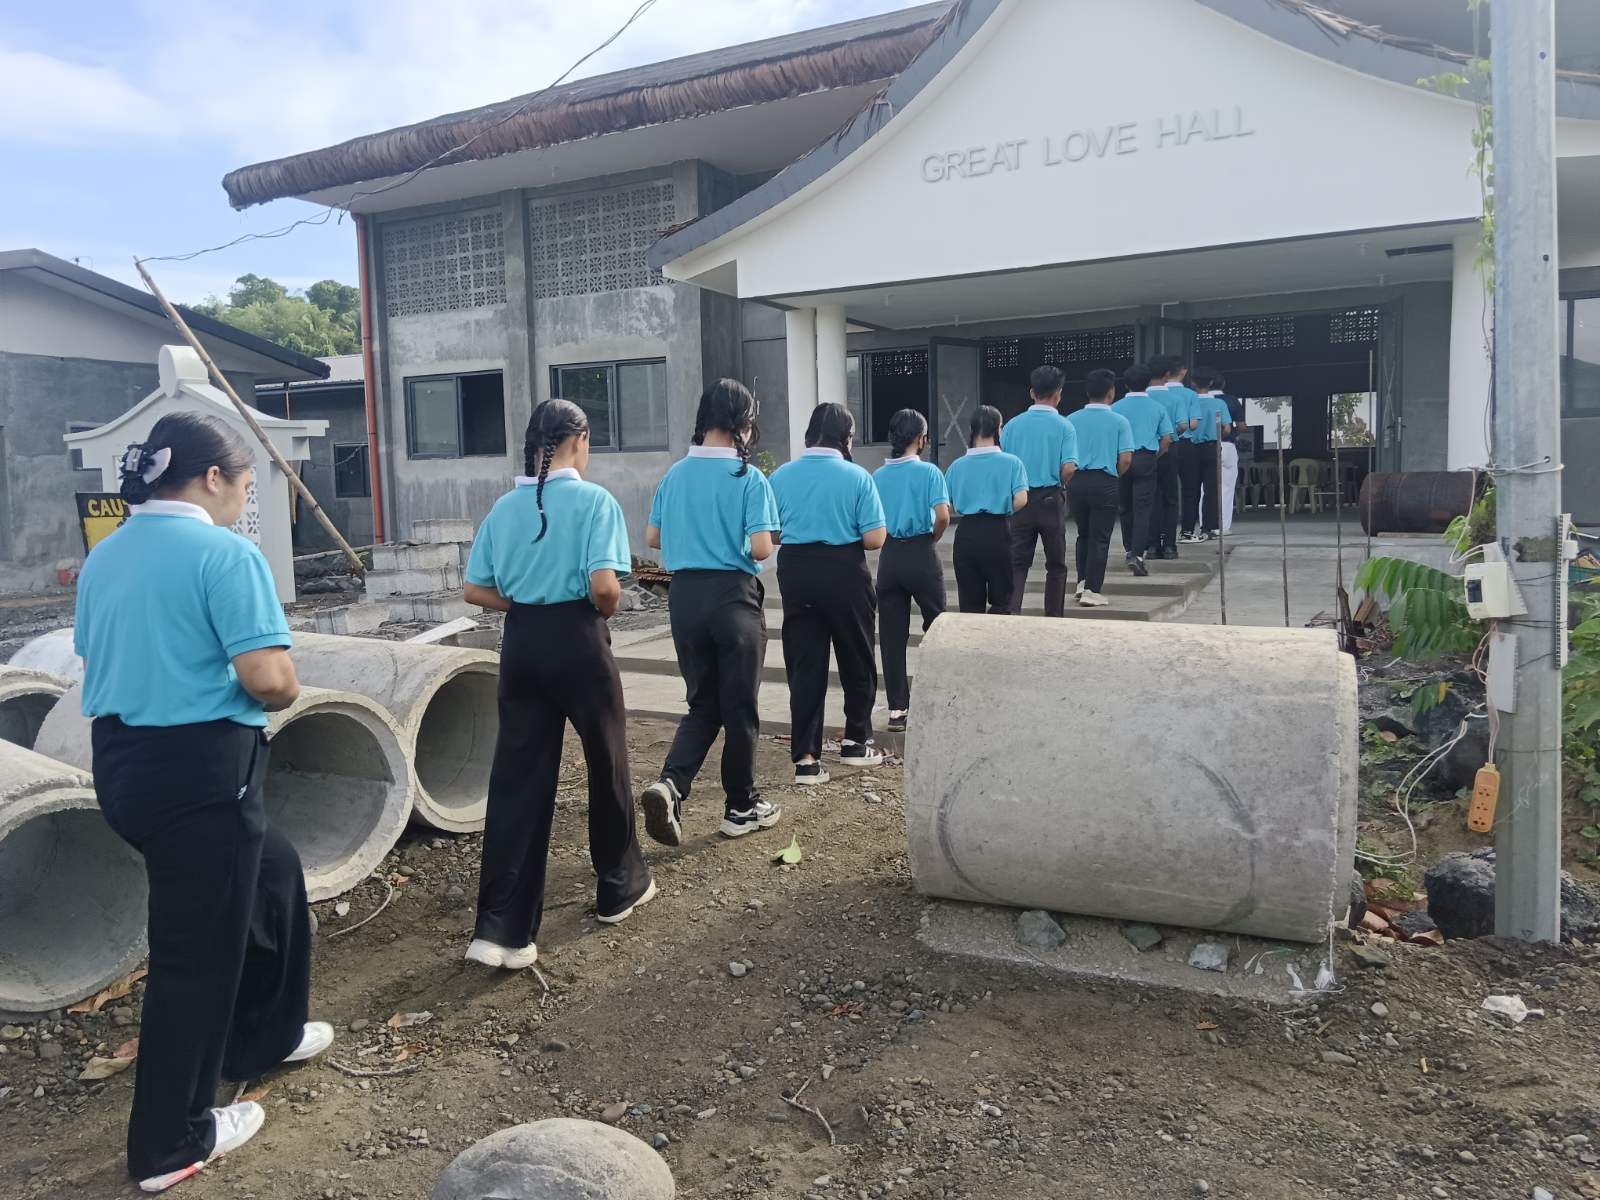 Tzu Chi scholars enter the Great Love Hall in Palo for their Humanity Class. 【Photo by Tzu Chi Palo】